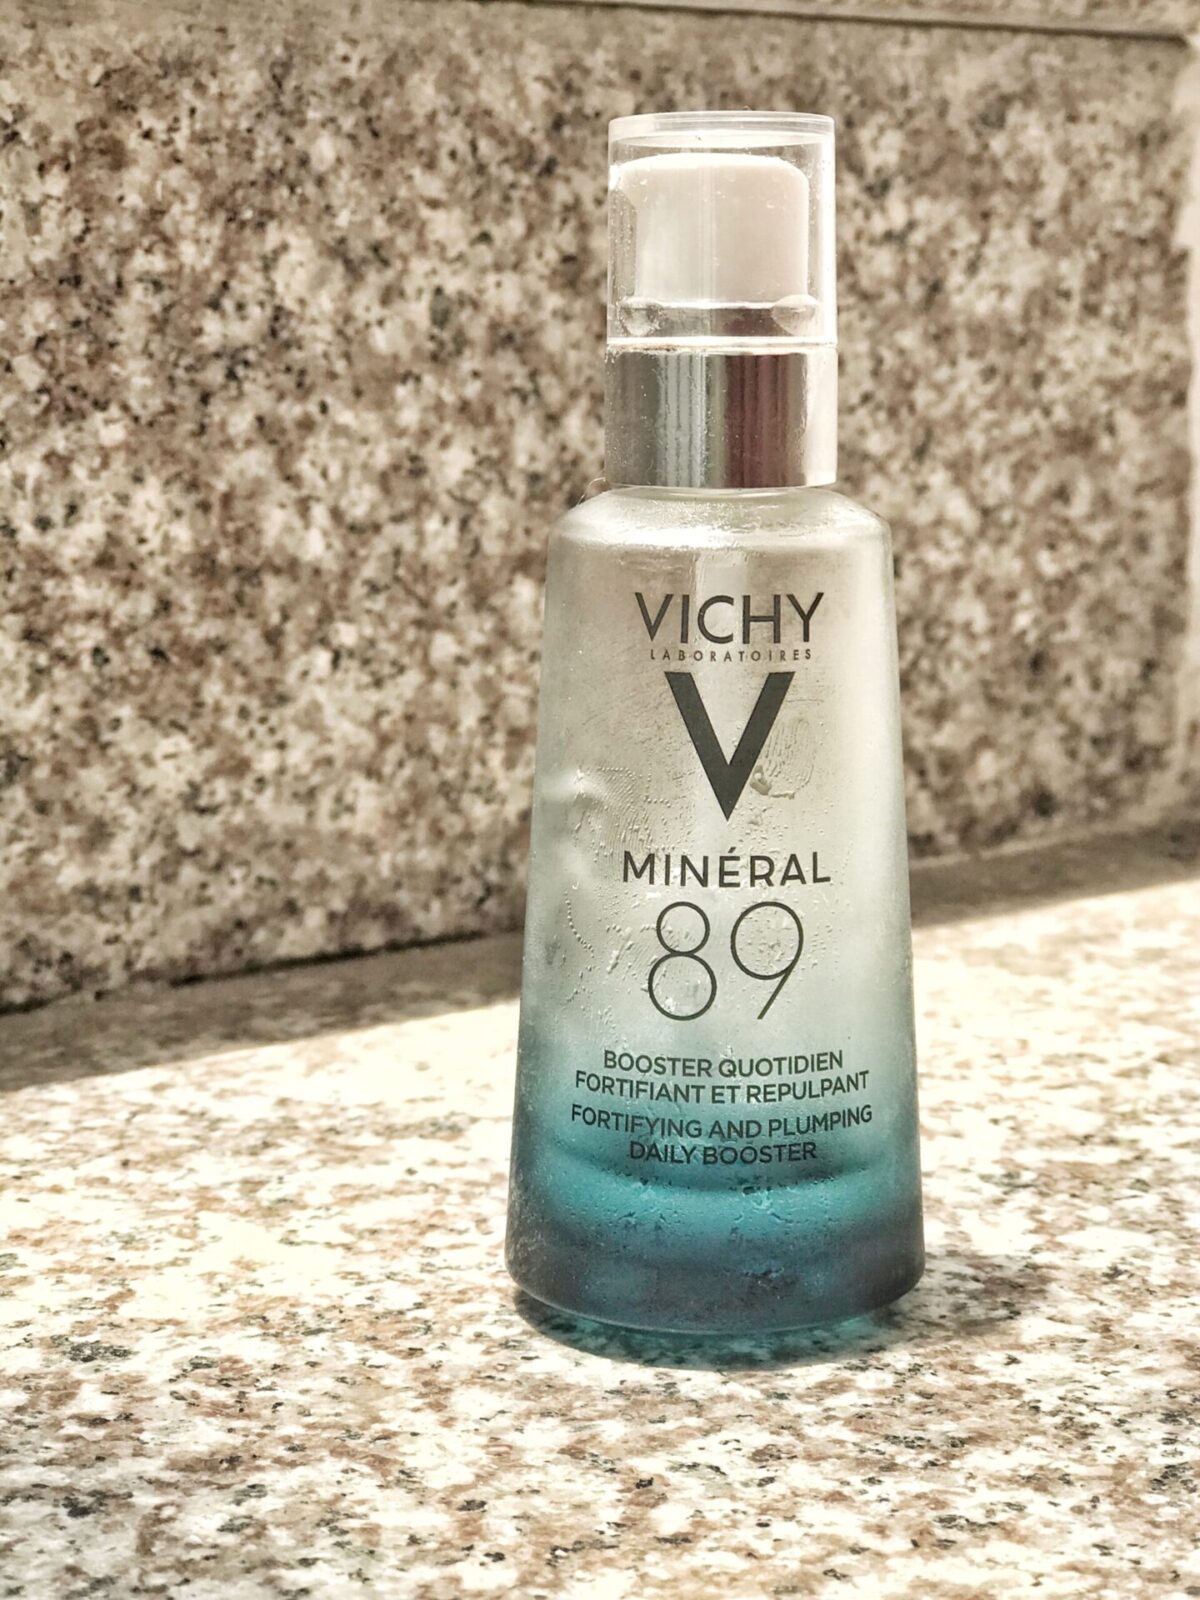 REVIEW DƯỠNG CHẤT VICHY MINERAL 89 BOOSTER 4